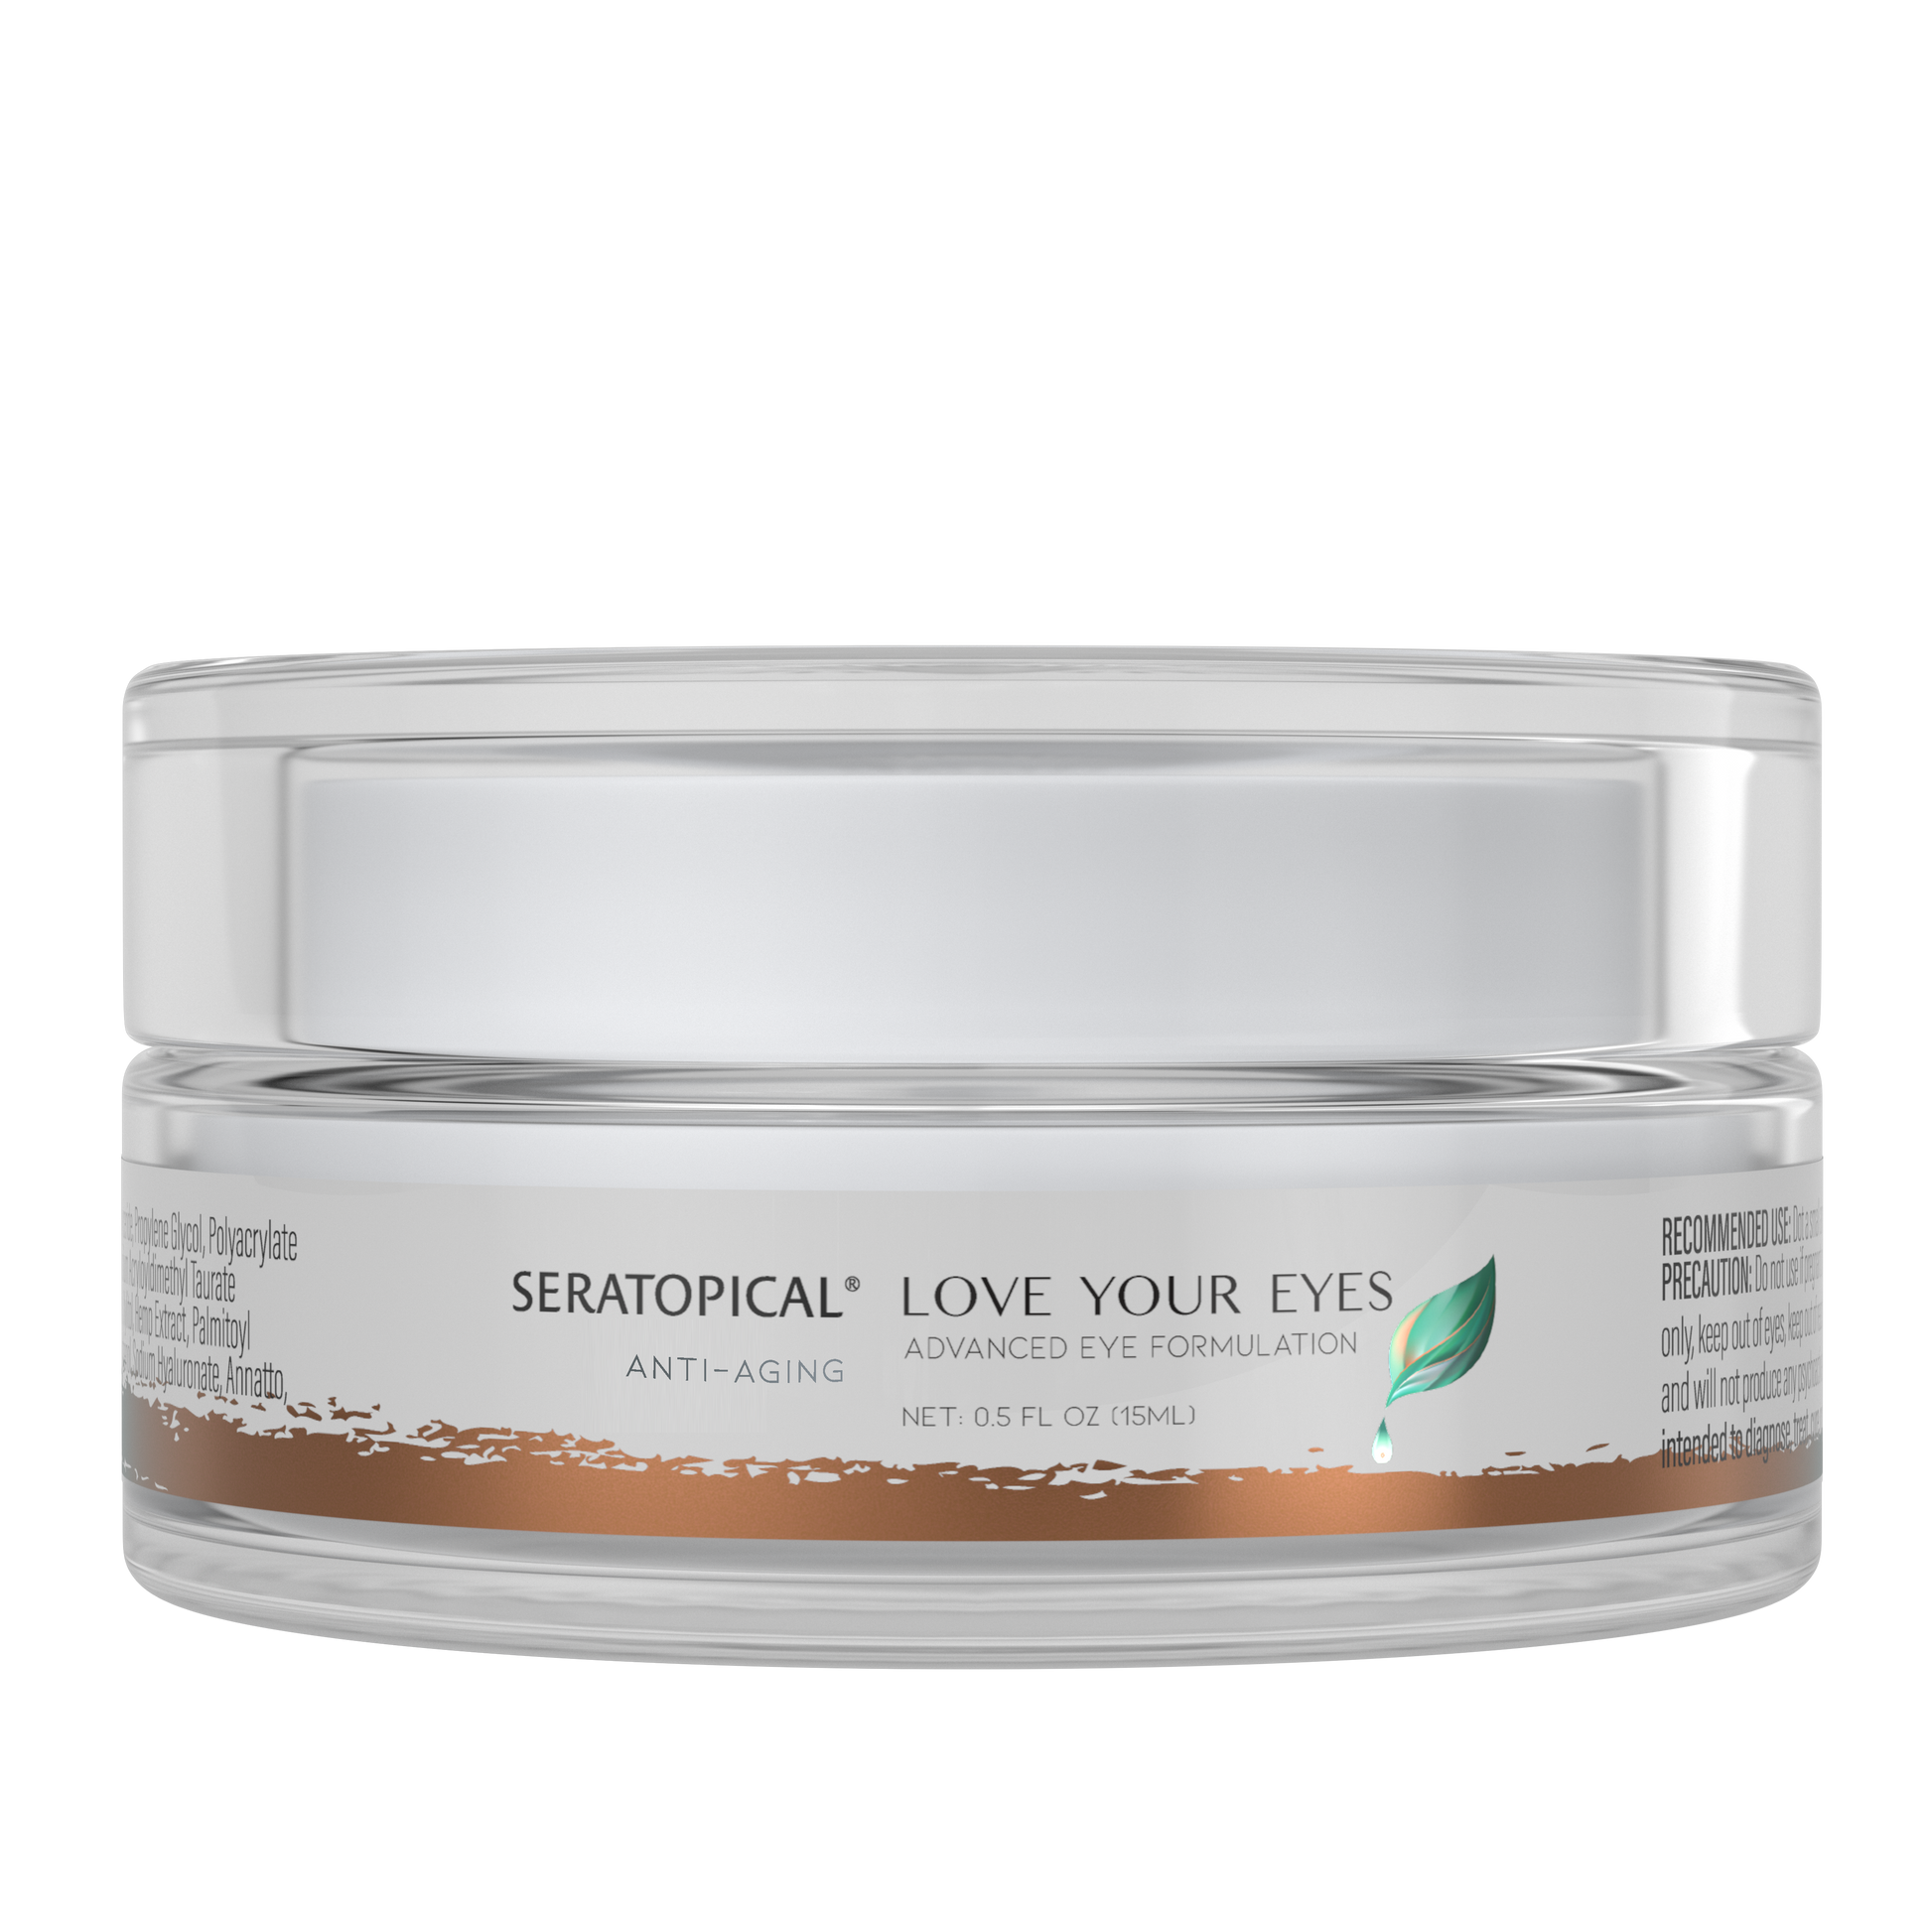 Seratopical Love Your Eyes Eye Cream product rendering